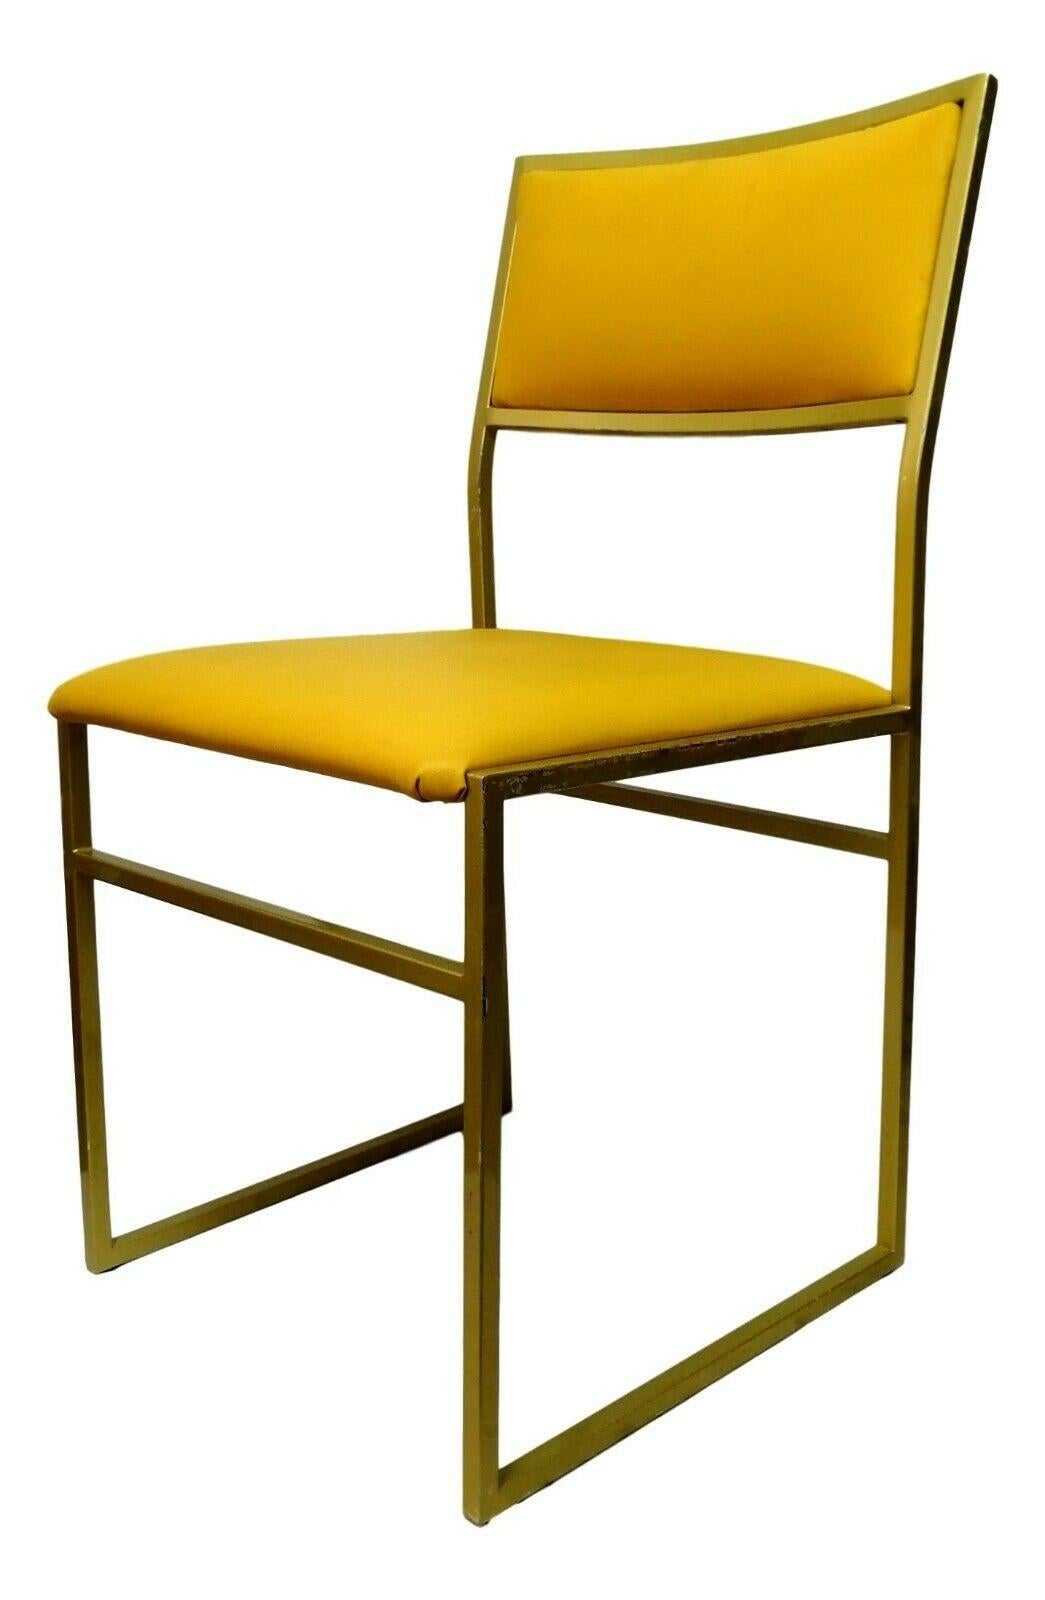 Collectible Chair in Gold Metal and Yellow Upholstery, 1970s For Sale 2